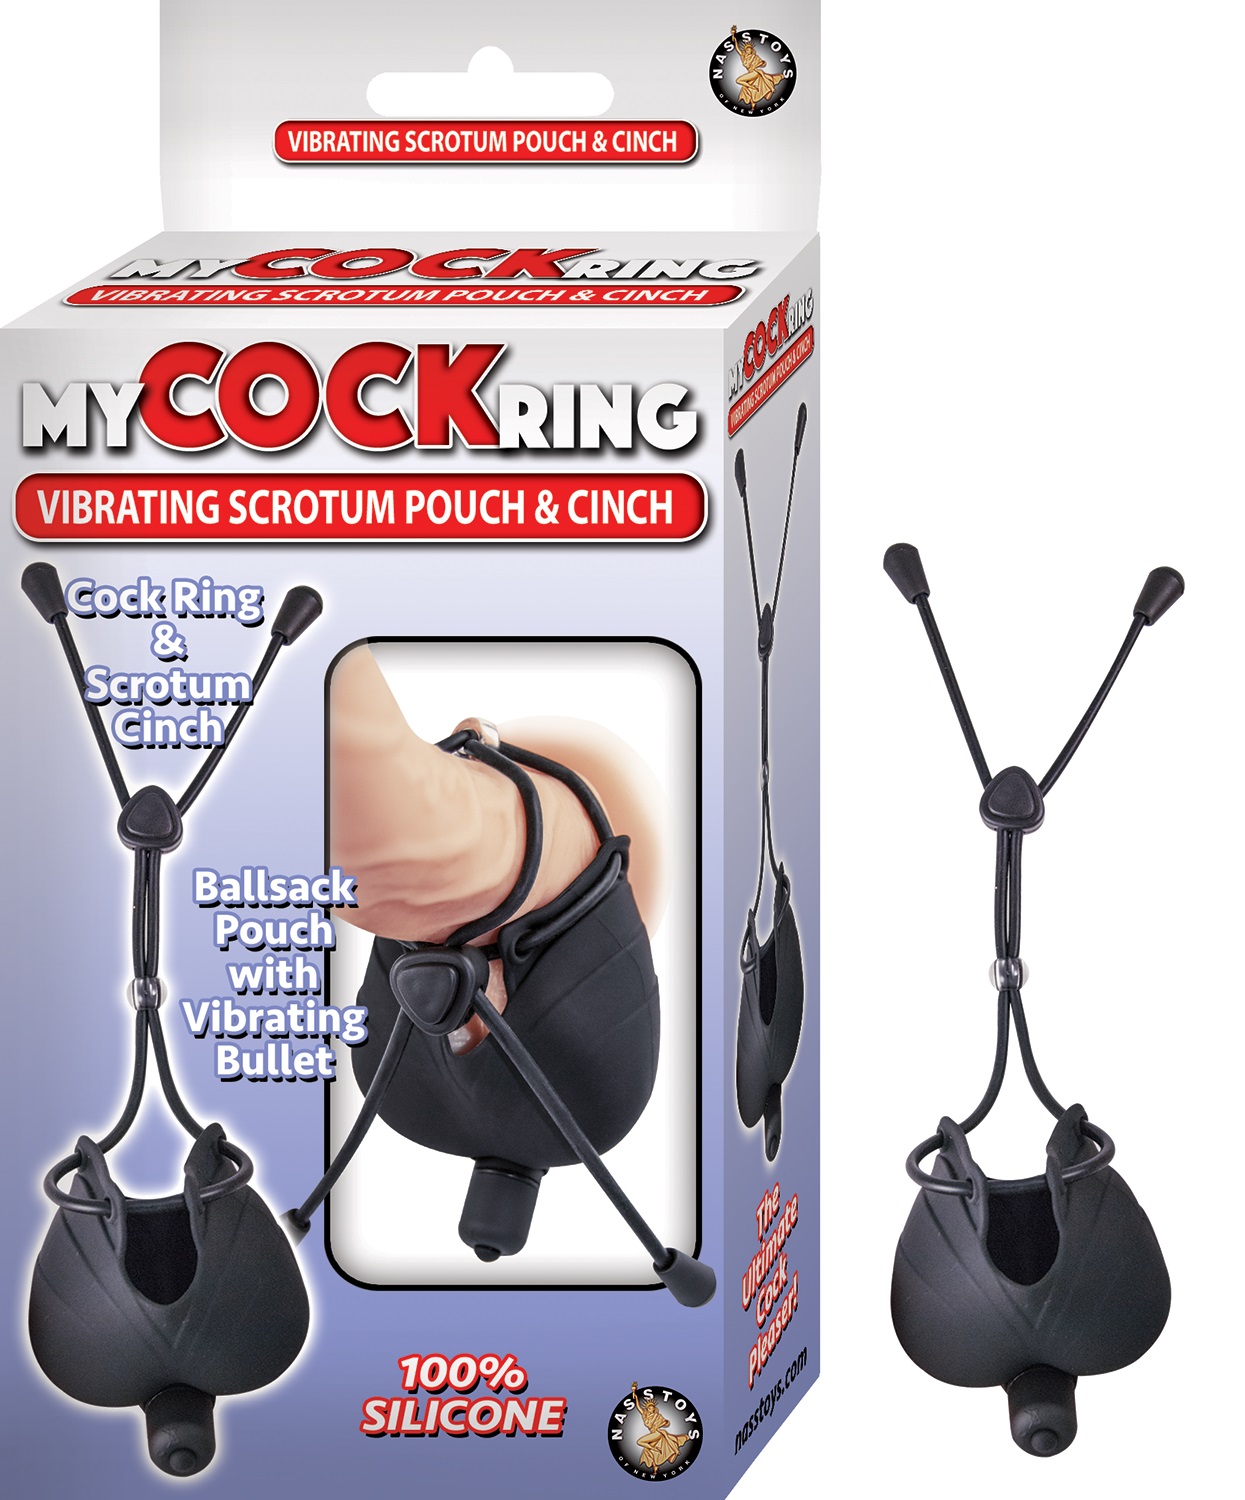 My+Cock+Ring+Vibrating+Scrotum+Pouch+And+Cinch+Silicone